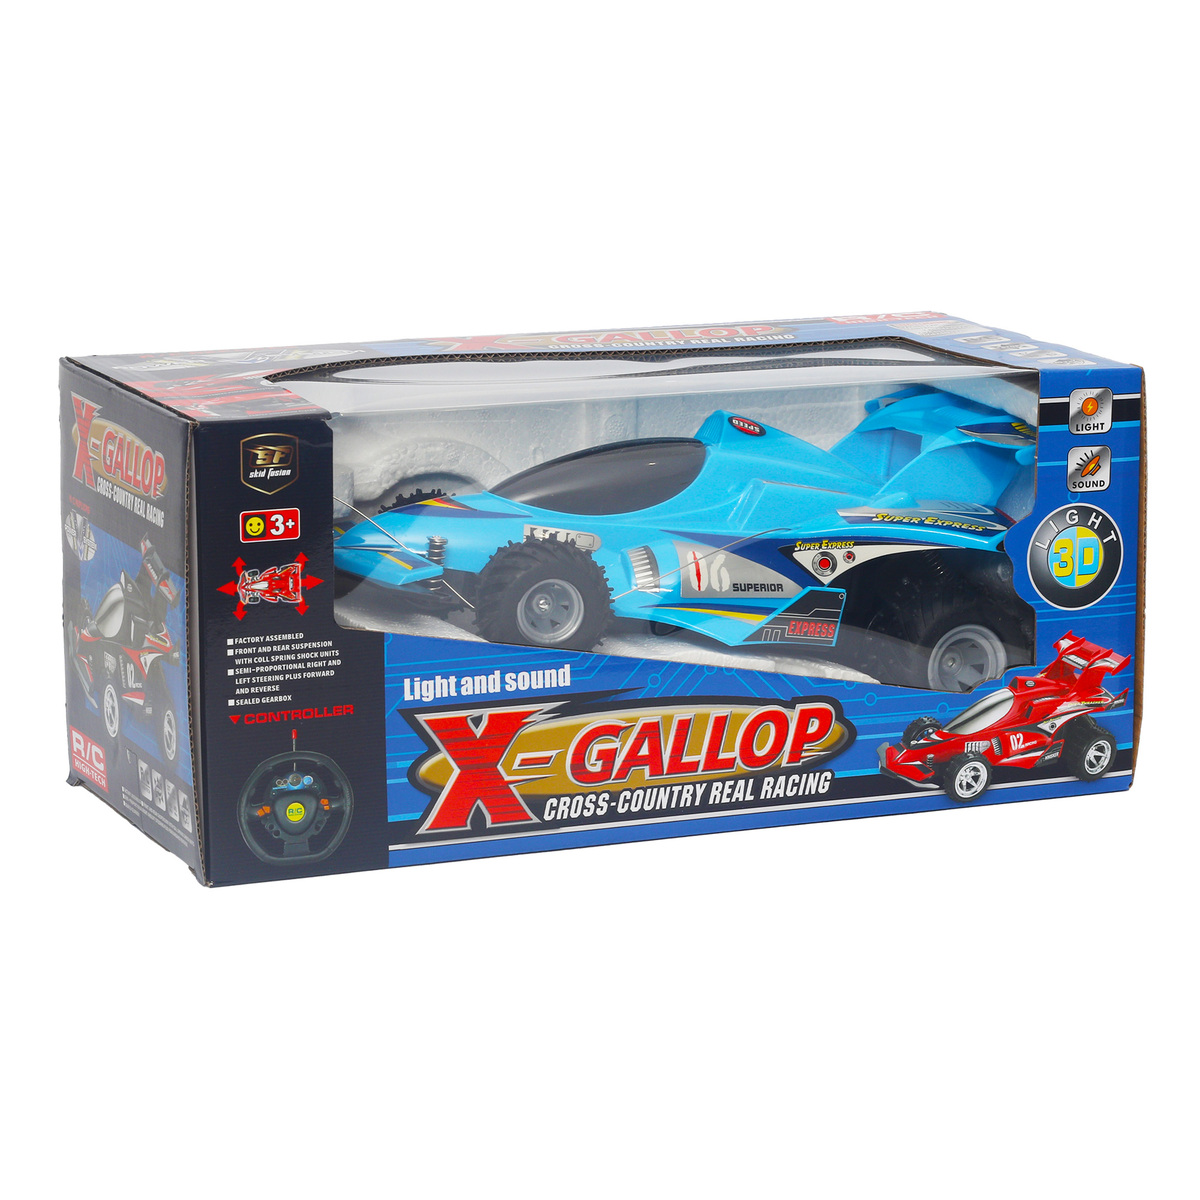 Skid Fusion Remote Control Rechargeable X-Gallop Car 0909-B Assorted